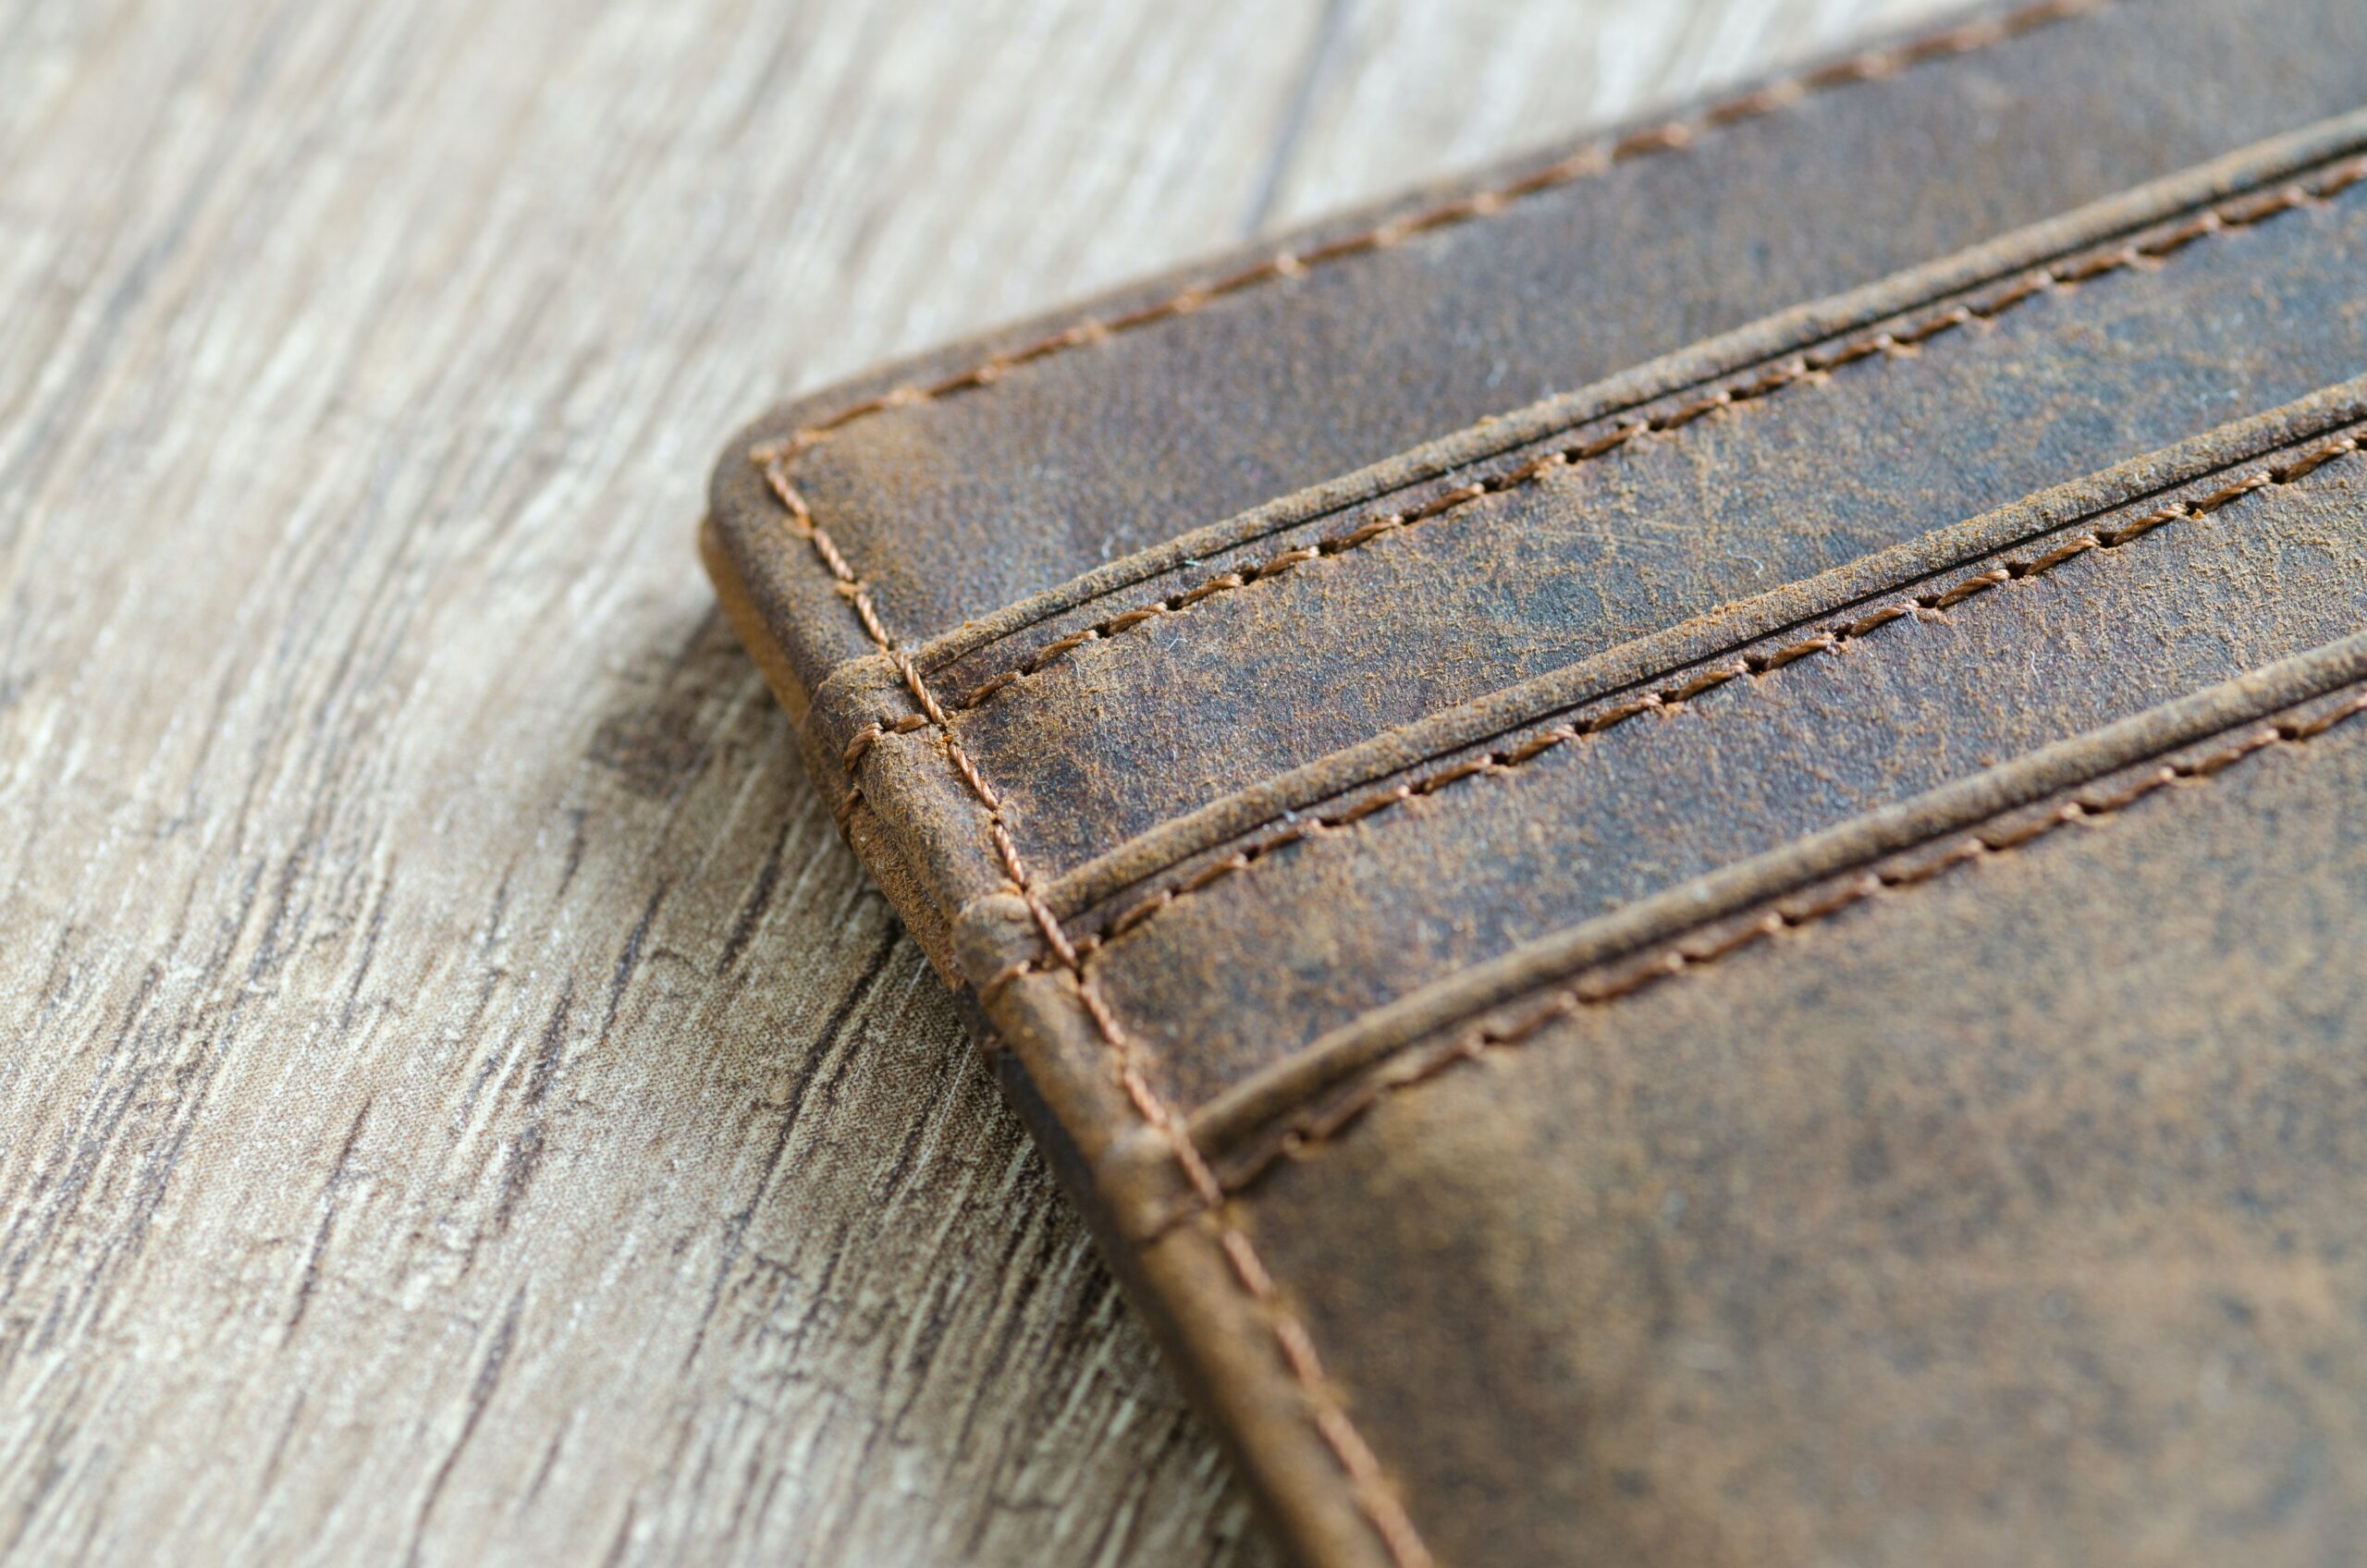 How To Clean a Leather Wallet